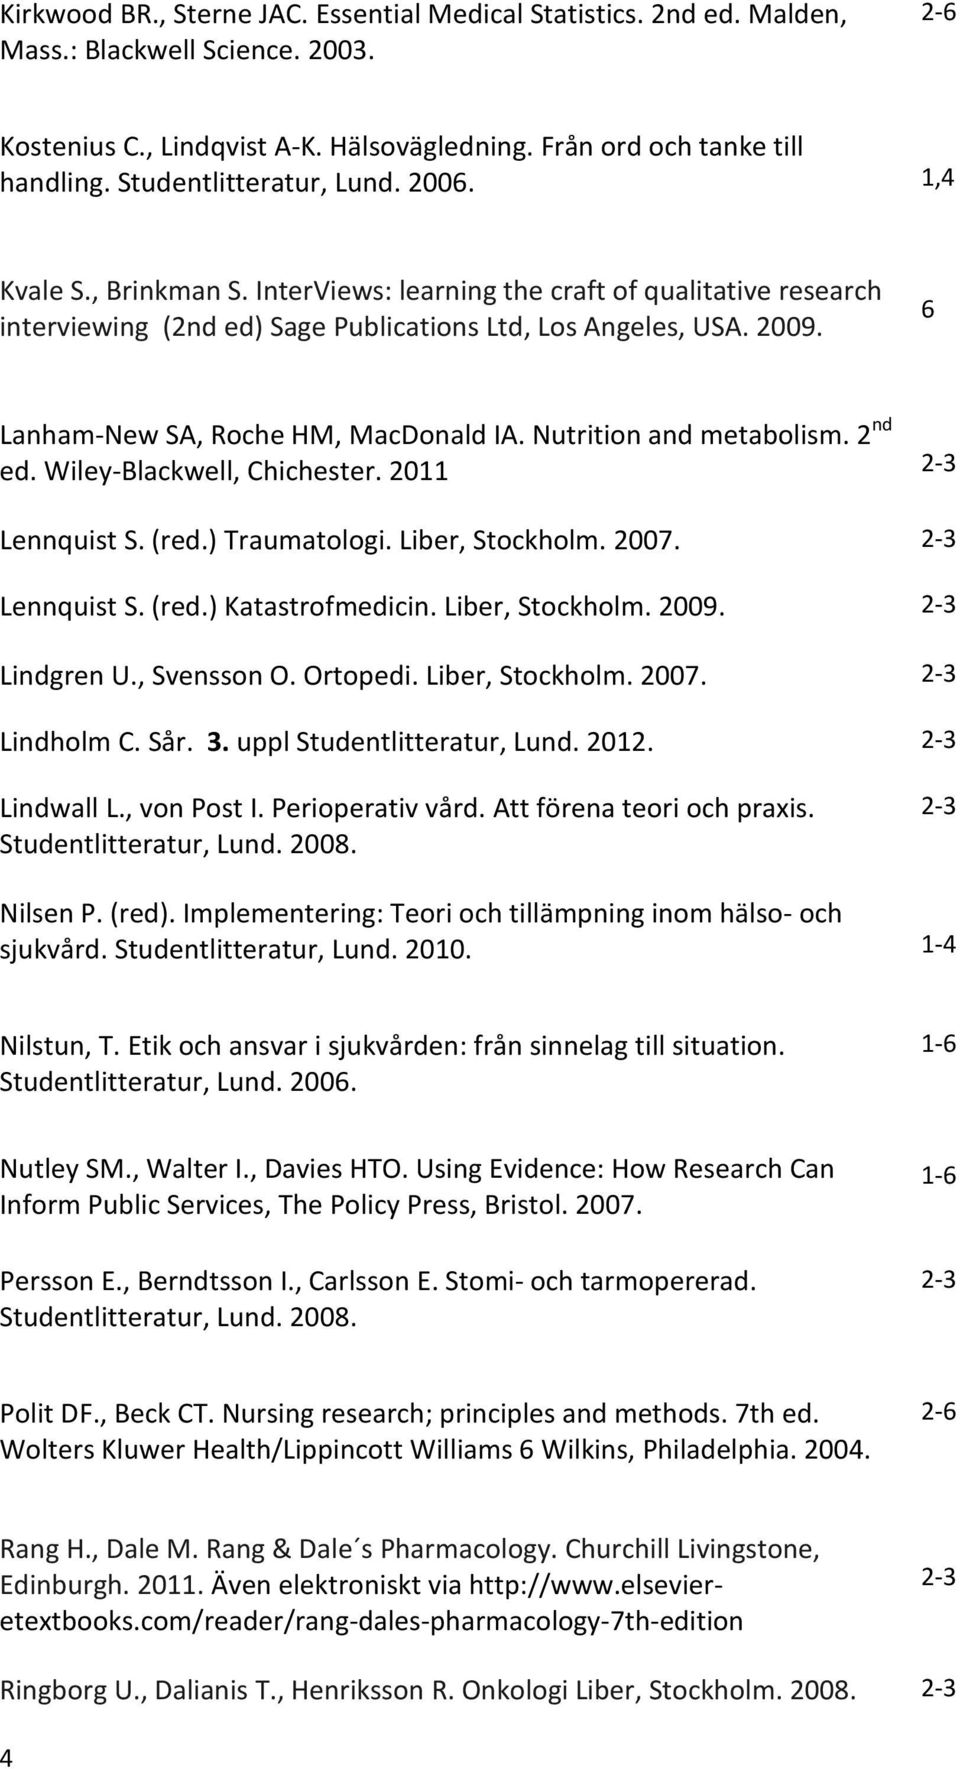 Lanham-New SA, Roche HM, MacDonald IA. Nutrition and metabolism. 2 nd ed. Wiley-Blackwell, Chichester. 2011 Lennquist S. (red.) Traumatologi. Liber, Stockholm. 2007. Lennquist S. (red.) Katastrofmedicin.